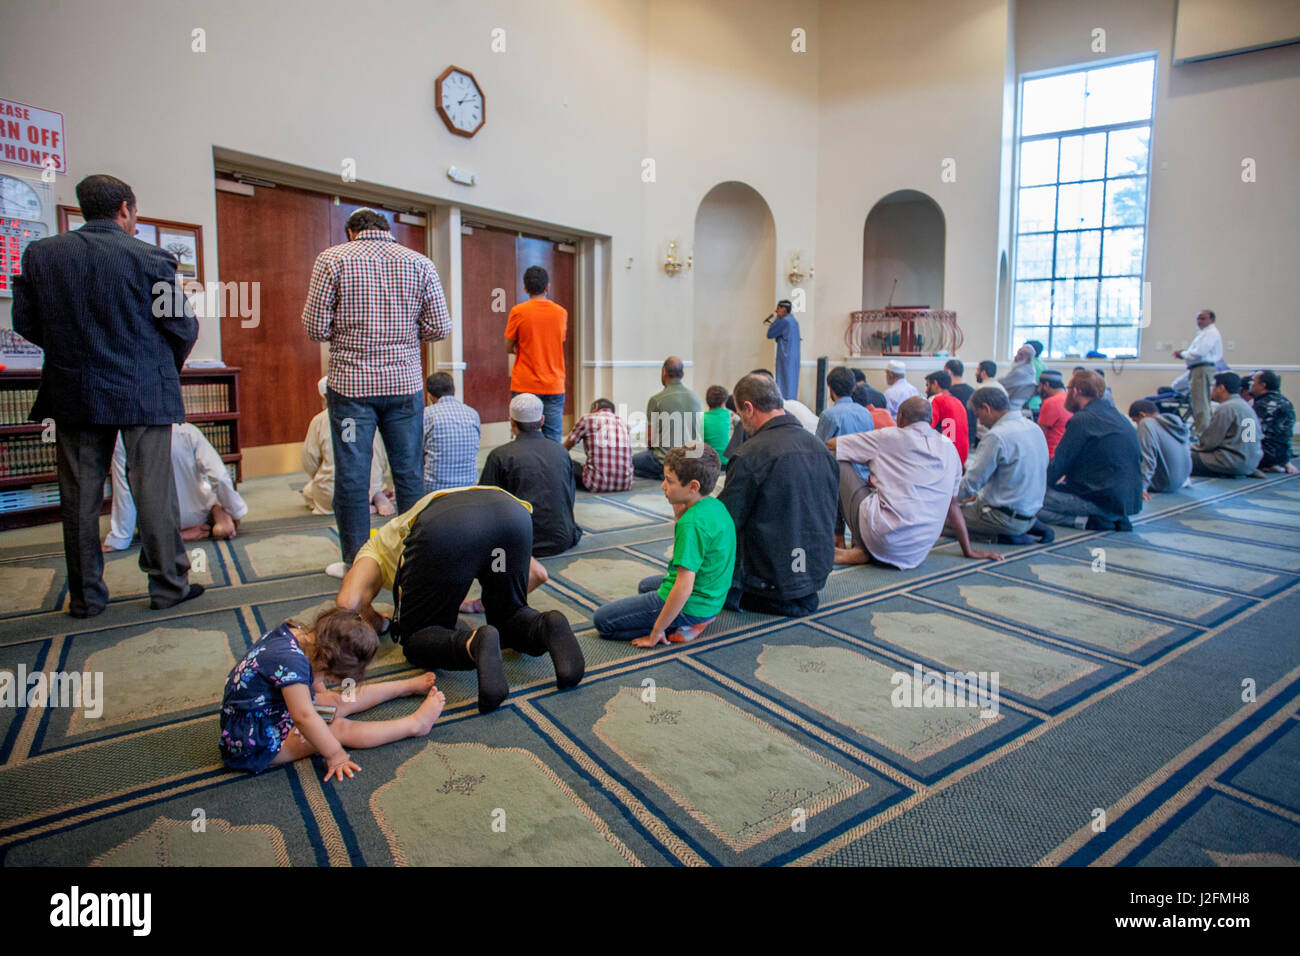 Muslim men prostrate themselves in 'Sujood' prayer position with their faces on the Islamic patterned carpet at Friday afternoon prayers during religious services at an Anaheim, CA, mosque. Note girl and boy worshippers. Stock Photo